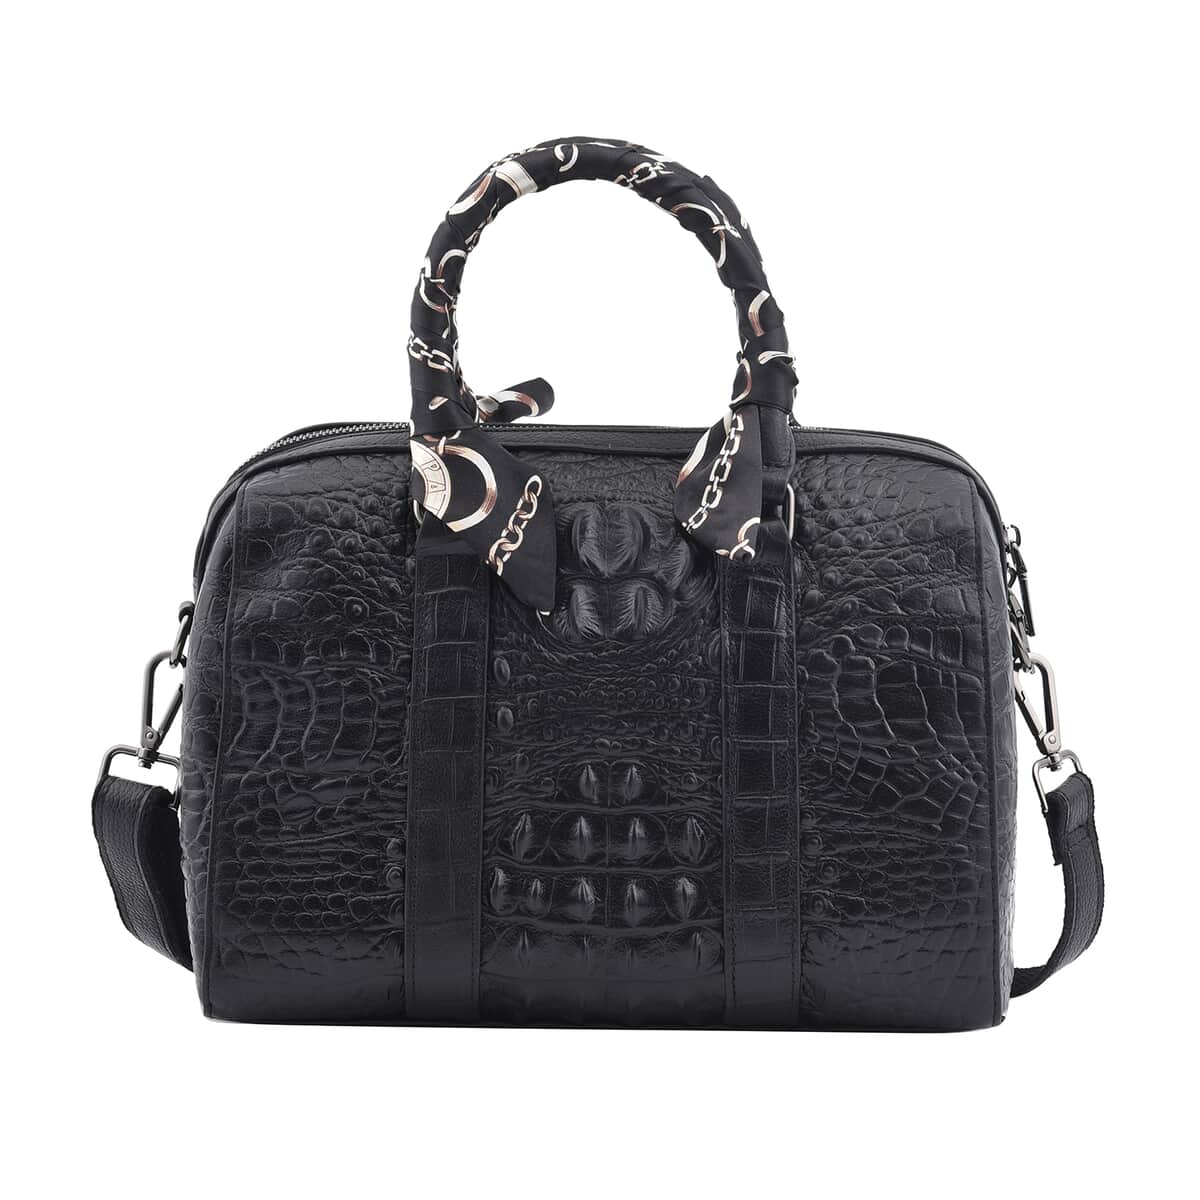 Black Crocodile Embossed Pattern Genuine Leather Convertible Bag (11"x5"x9") with Handle Drop and Shoulder Strap image number 0